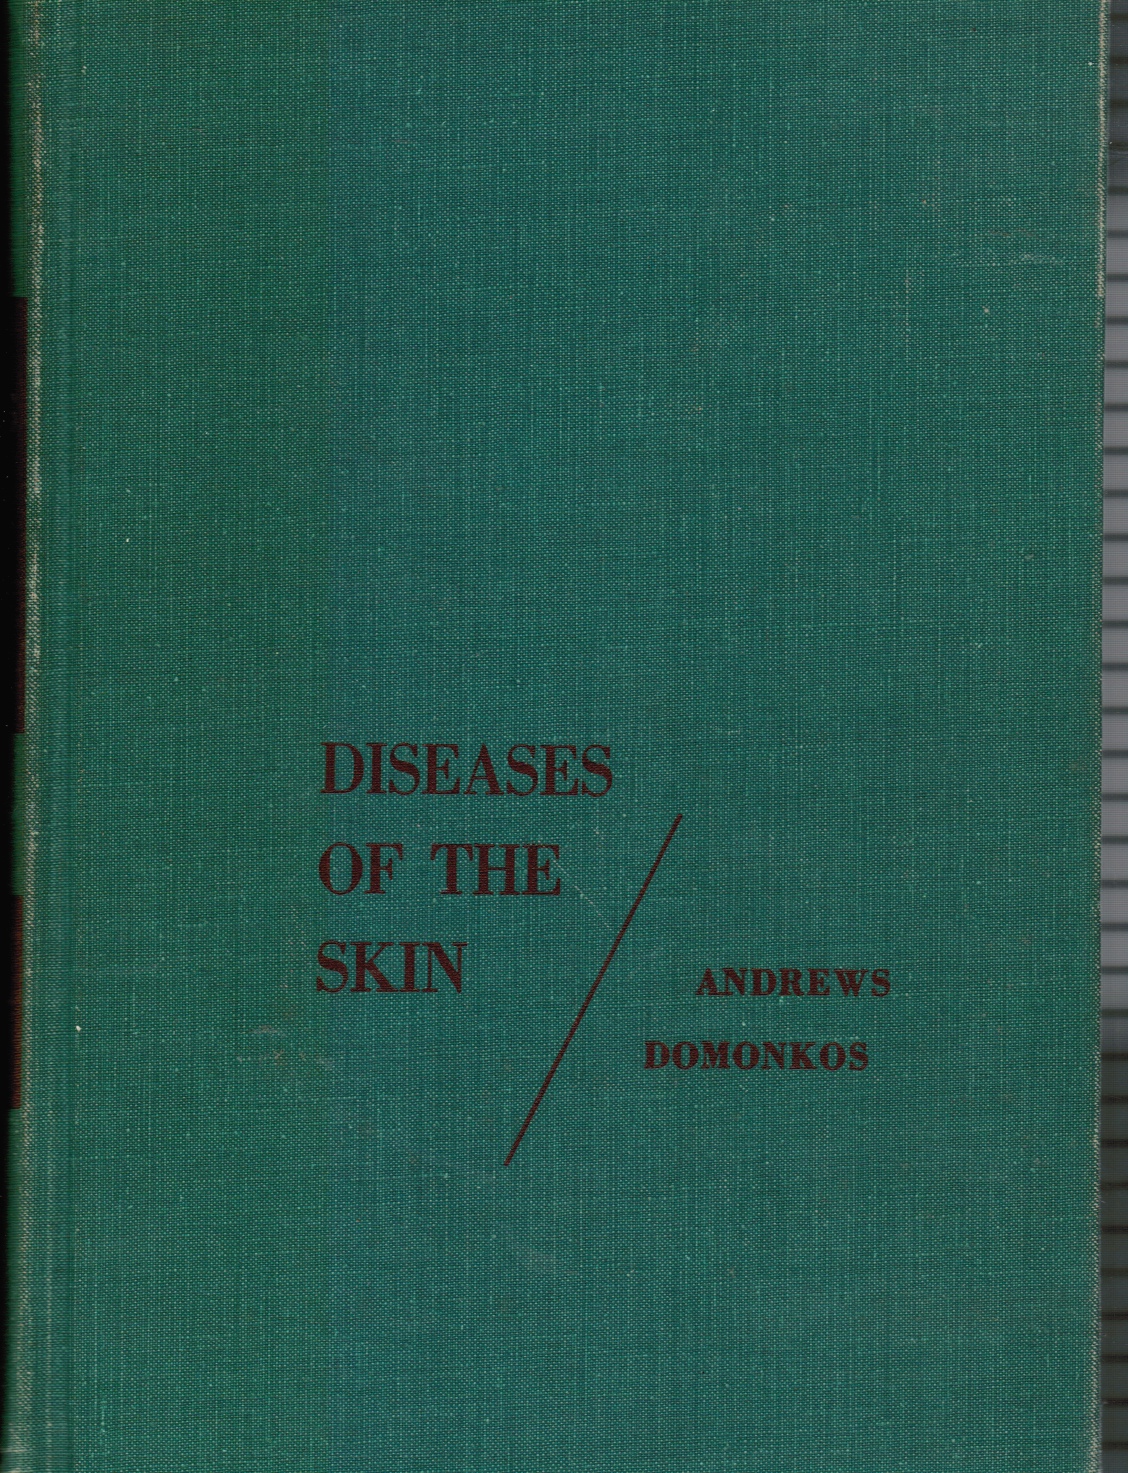 ANDREWS, GEORGE CLINTON; DOMONKOS, ANTHONY - Diseases of the Skin: For Practioners and Students